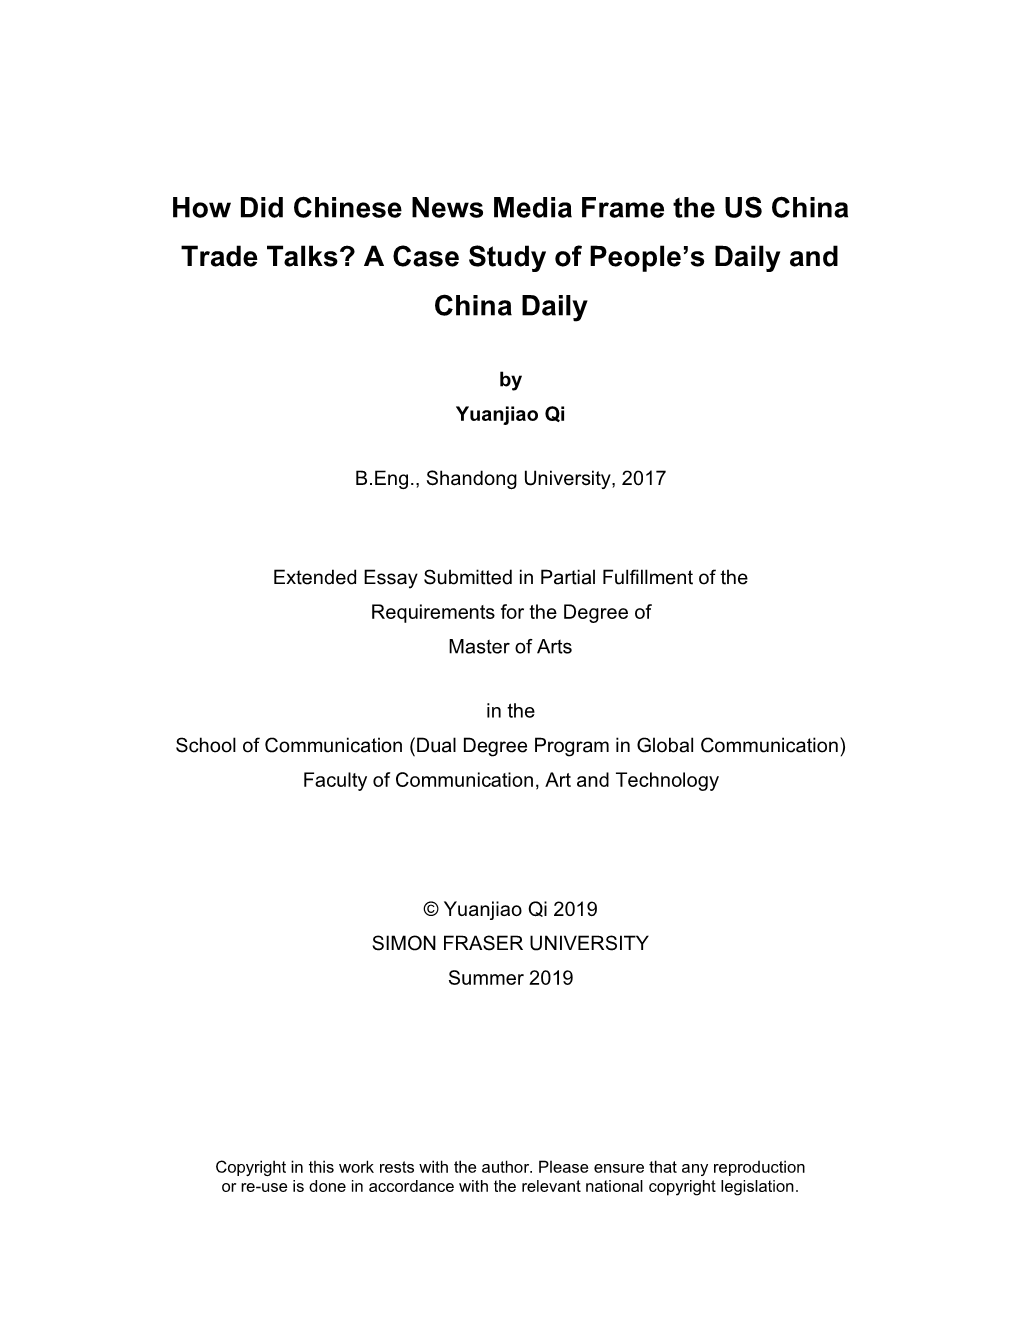 How Did Chinese News Media Frame the US China Trade Talks? a Case Study of People’S Daily and China Daily